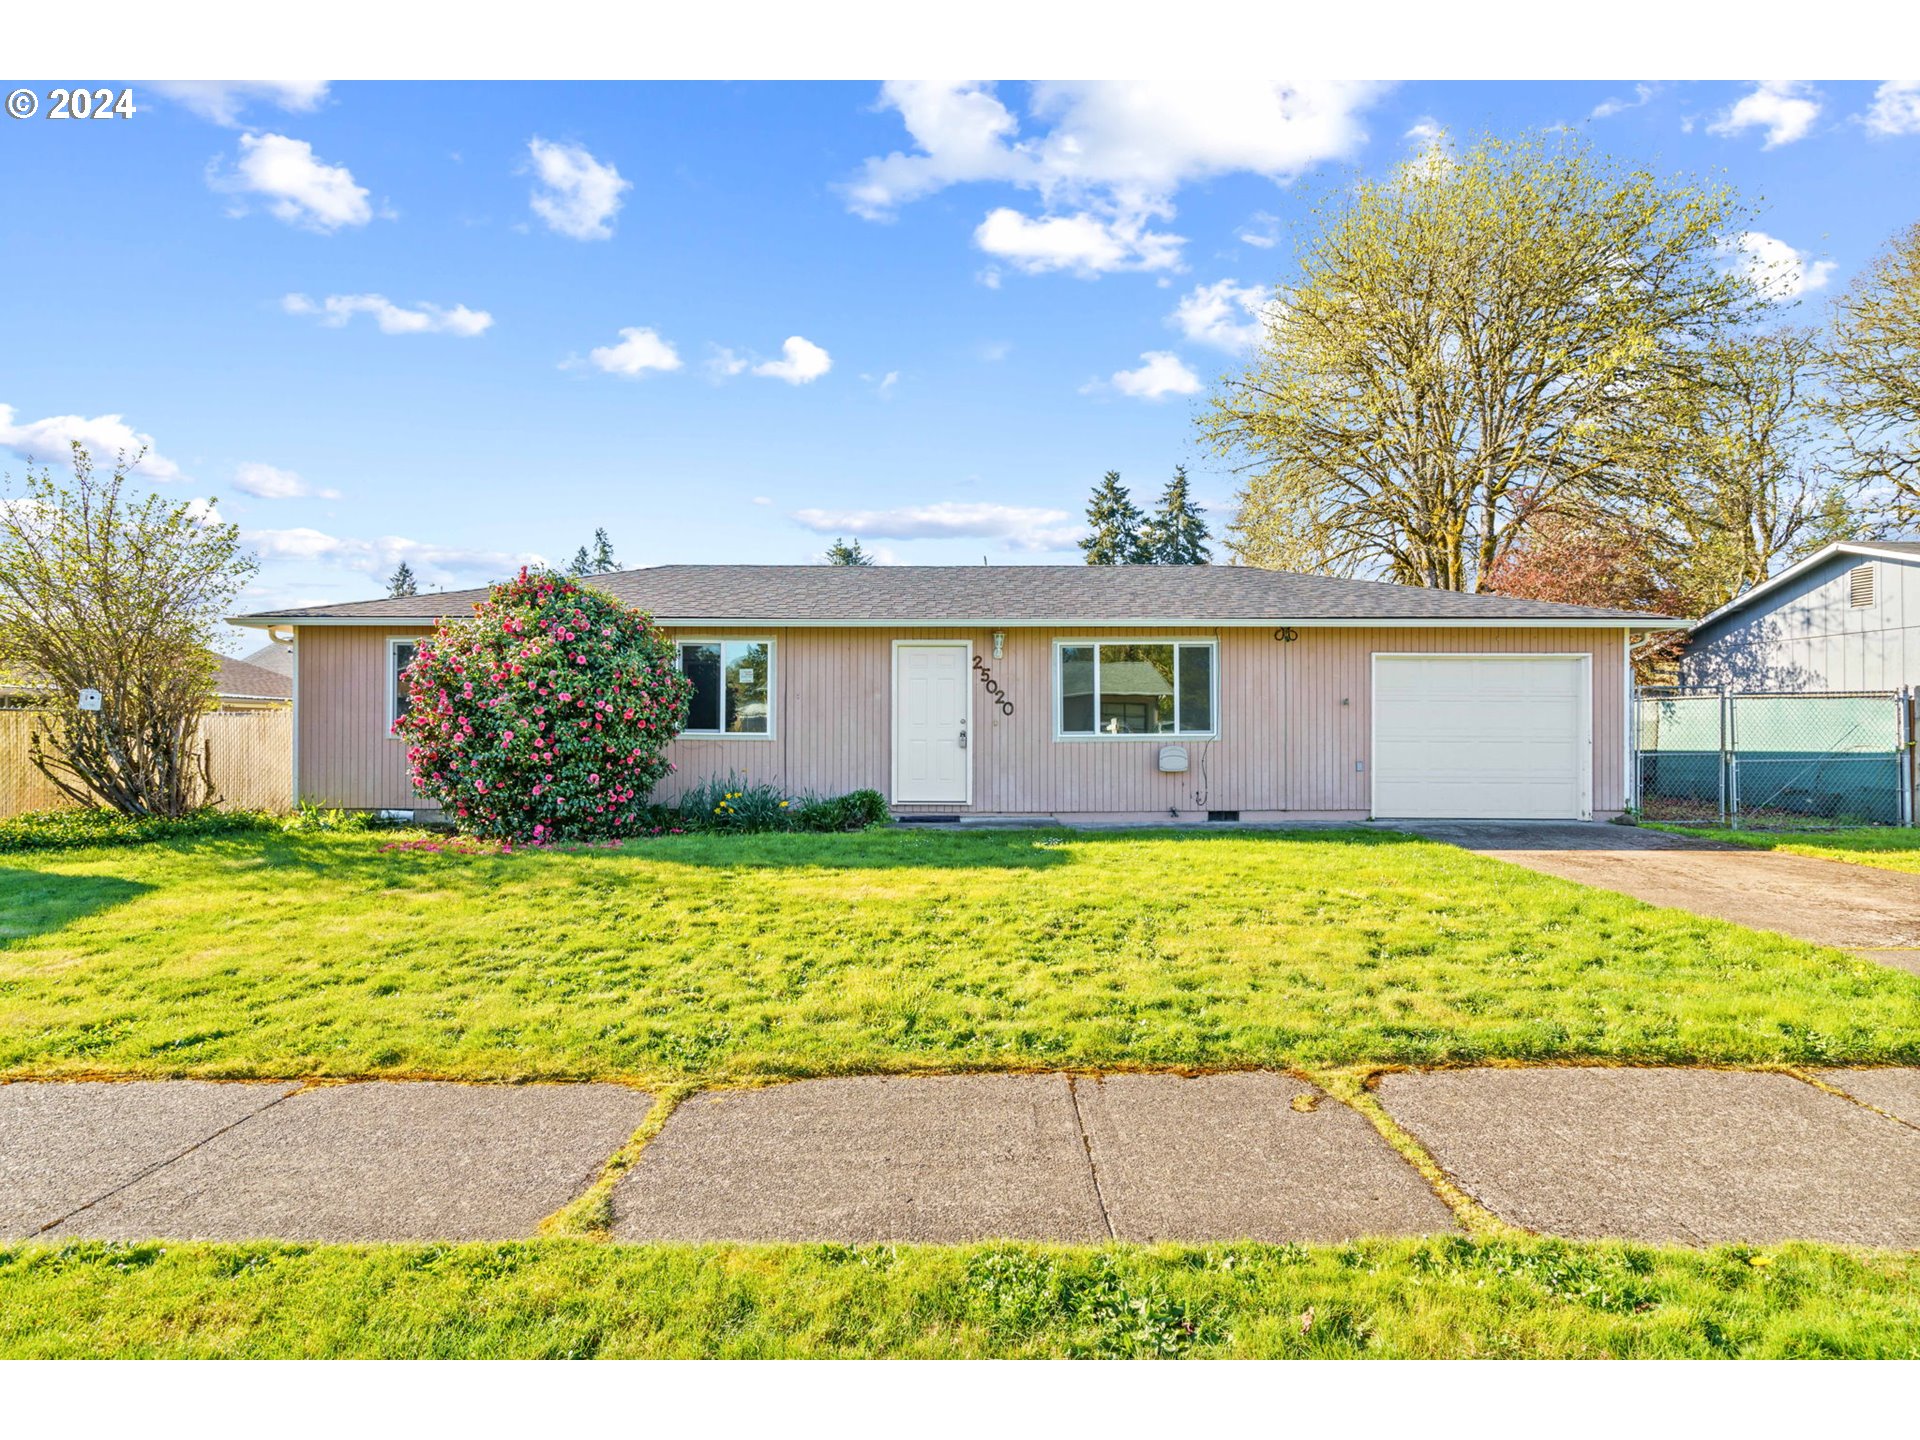 Lets all welcome this adorable 3 bed, 1 bath home to the market in Veneta, OR! An amazing opportunity for a starter home or investor looking for a rental property. SELLER IS OFFERING A TEN-THOUSAND DOLLAR CREDIT ($10,000) TOWARDS BUYERS CLOSING IN THE EVENT OF A FULL PRICE OFFER! Sitting at just over 1,000 sq. feet, with a newly updated kitchen, all doors and windows to the exterior replaced, and fresh interior paint throughout, you will not want to miss it! Come and see it today!